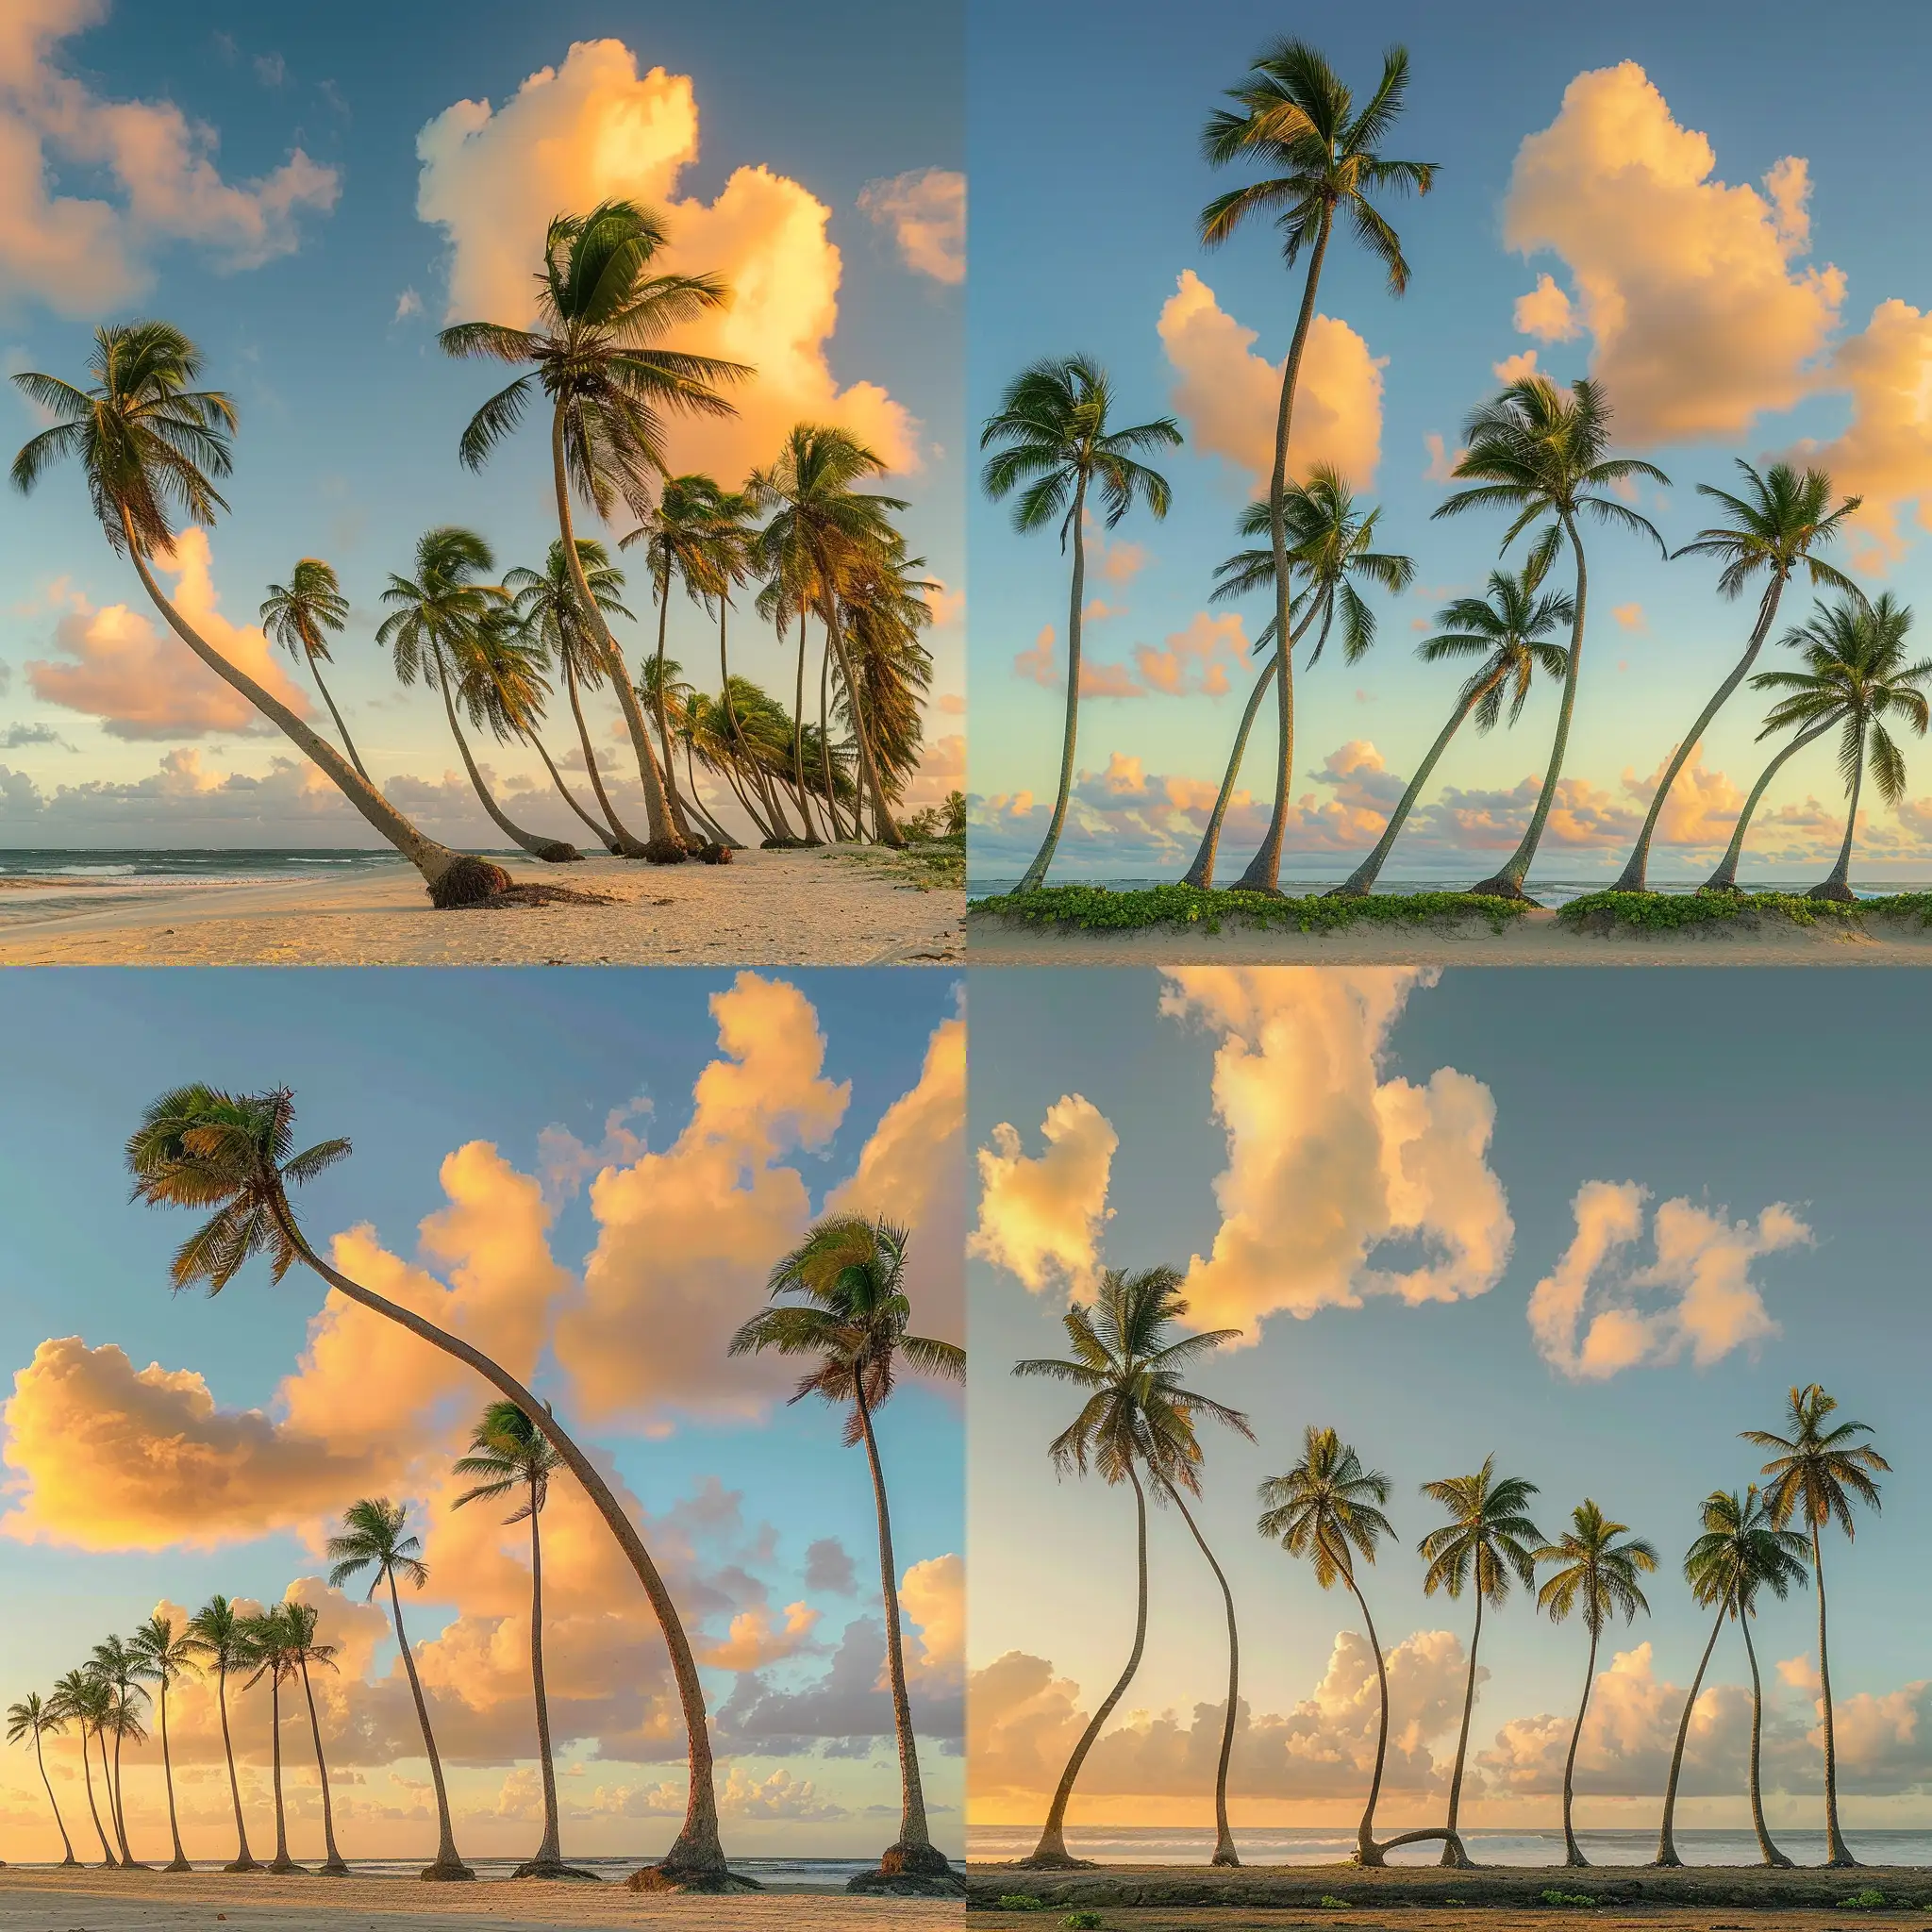 A line of palm trees with one strangely bent palm tree on tropical beach at Golden hour, sunset, stunning photography, masterpiece, cumulus clouds